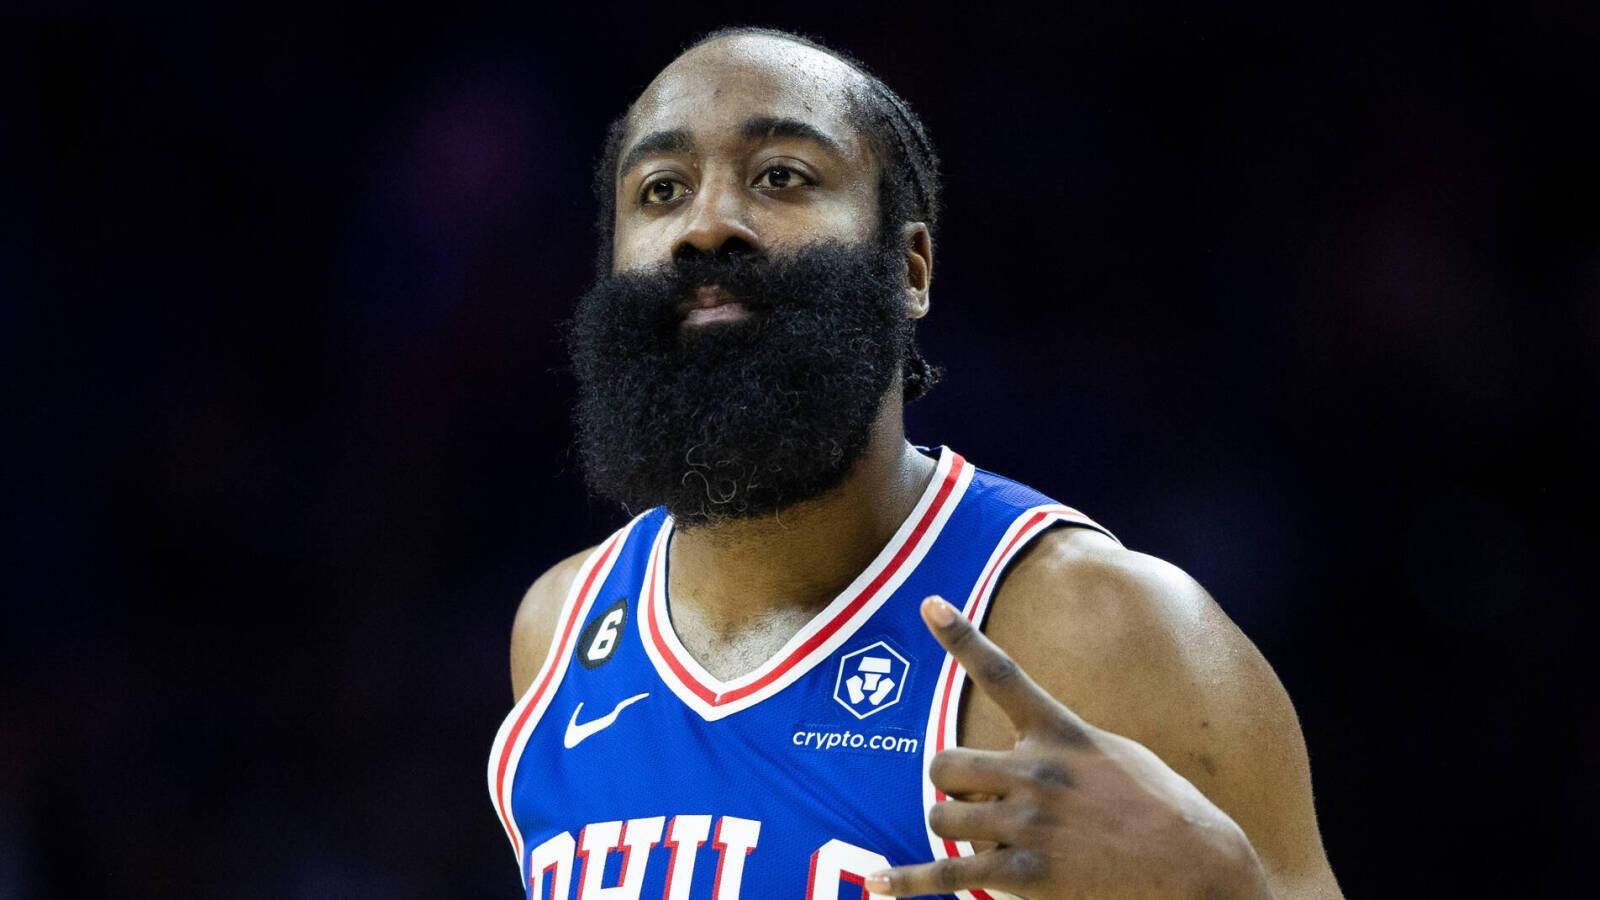 ESPN's Stephen A. Smith: James Harden blew up max deal with Rockets